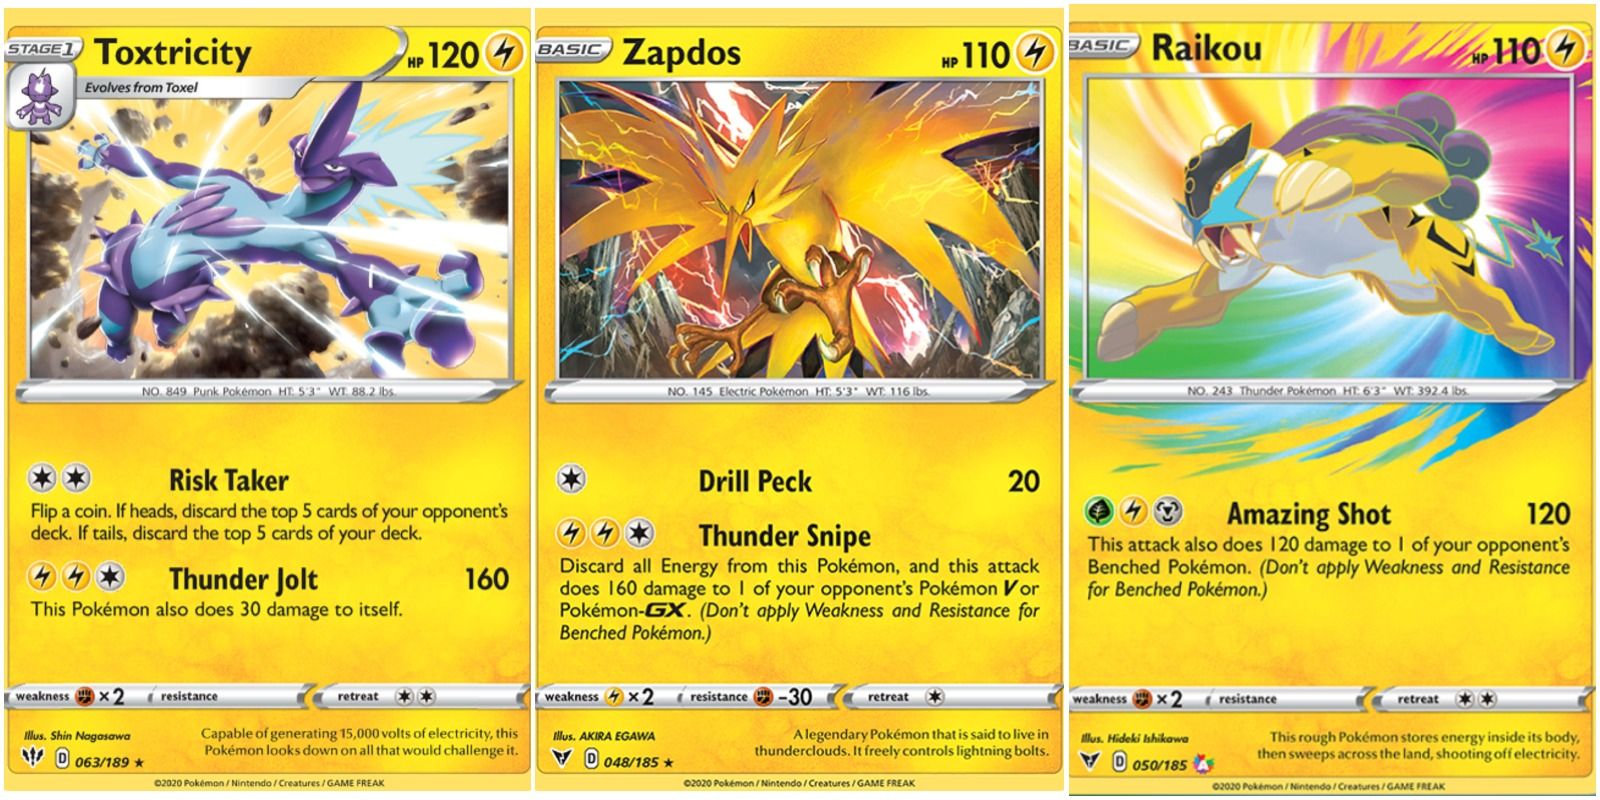 toxtricity, zapdos, and raikou cards.